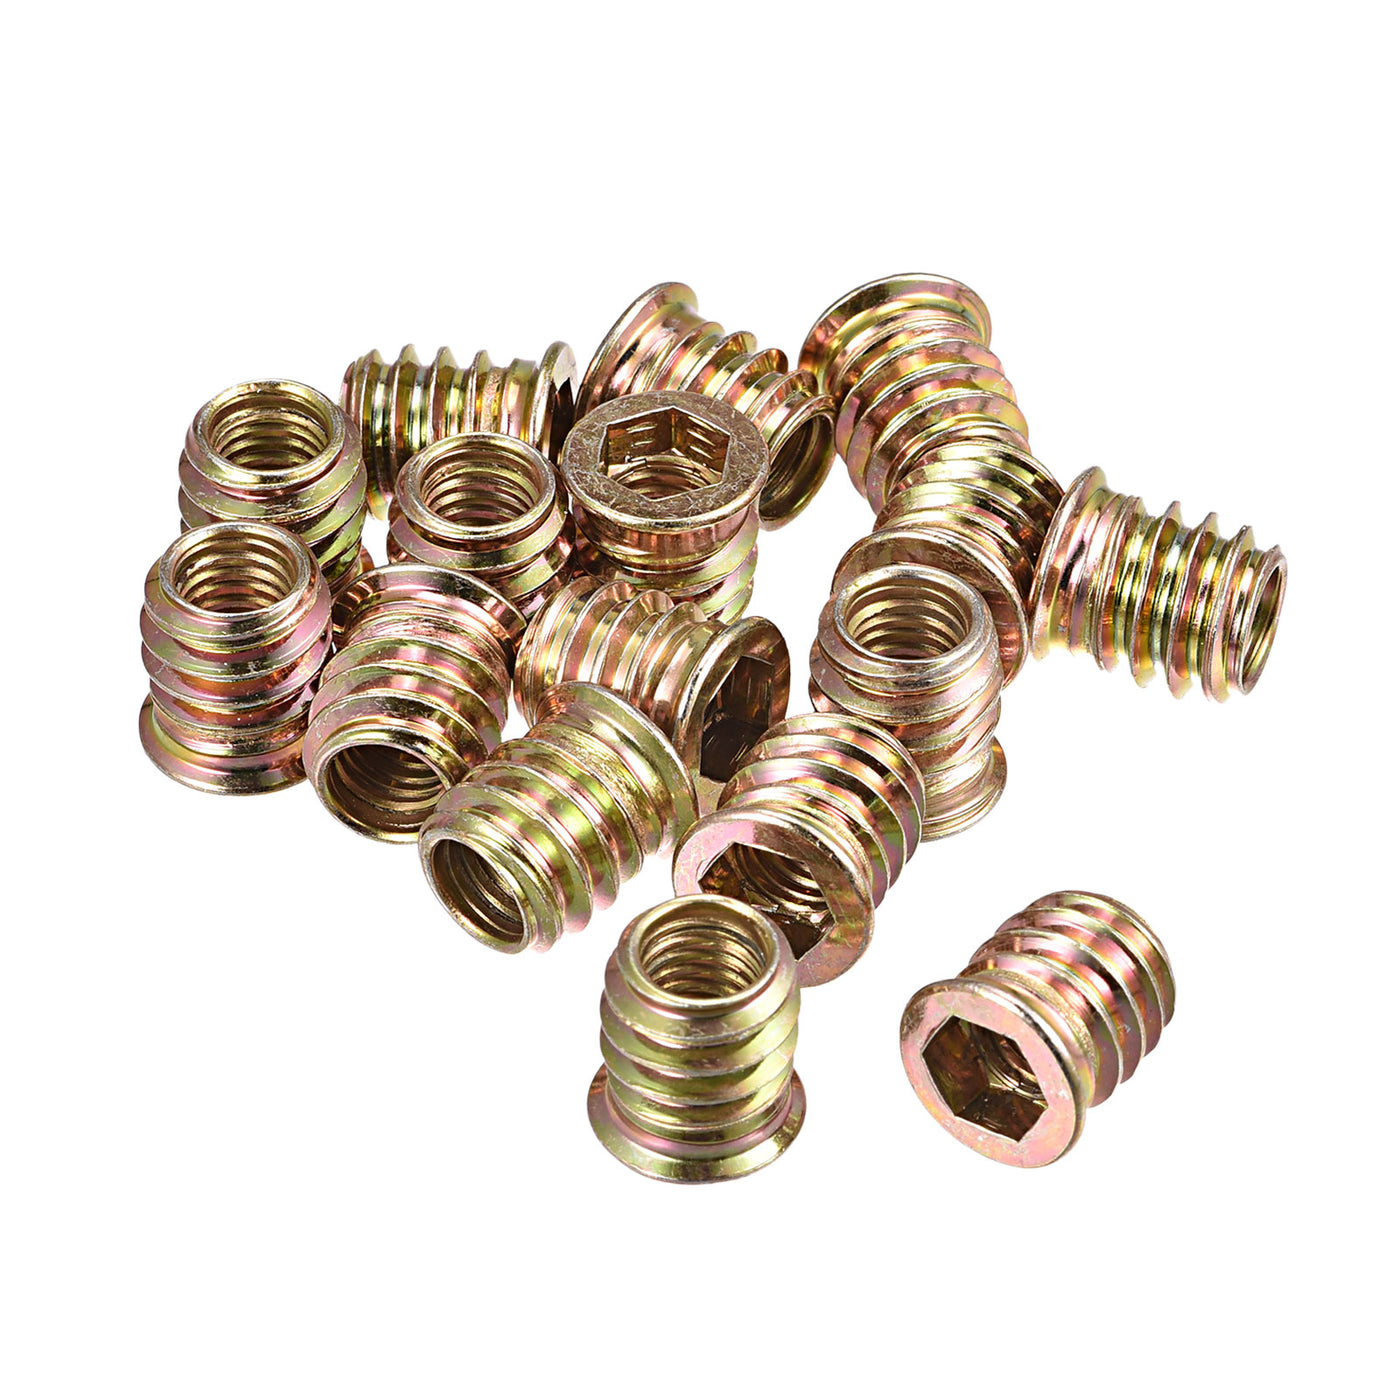 uxcell Uxcell M8x15mm Threaded Inserts for Wood Hex Socket Drive Furniture Screw-in Nut 16pcs